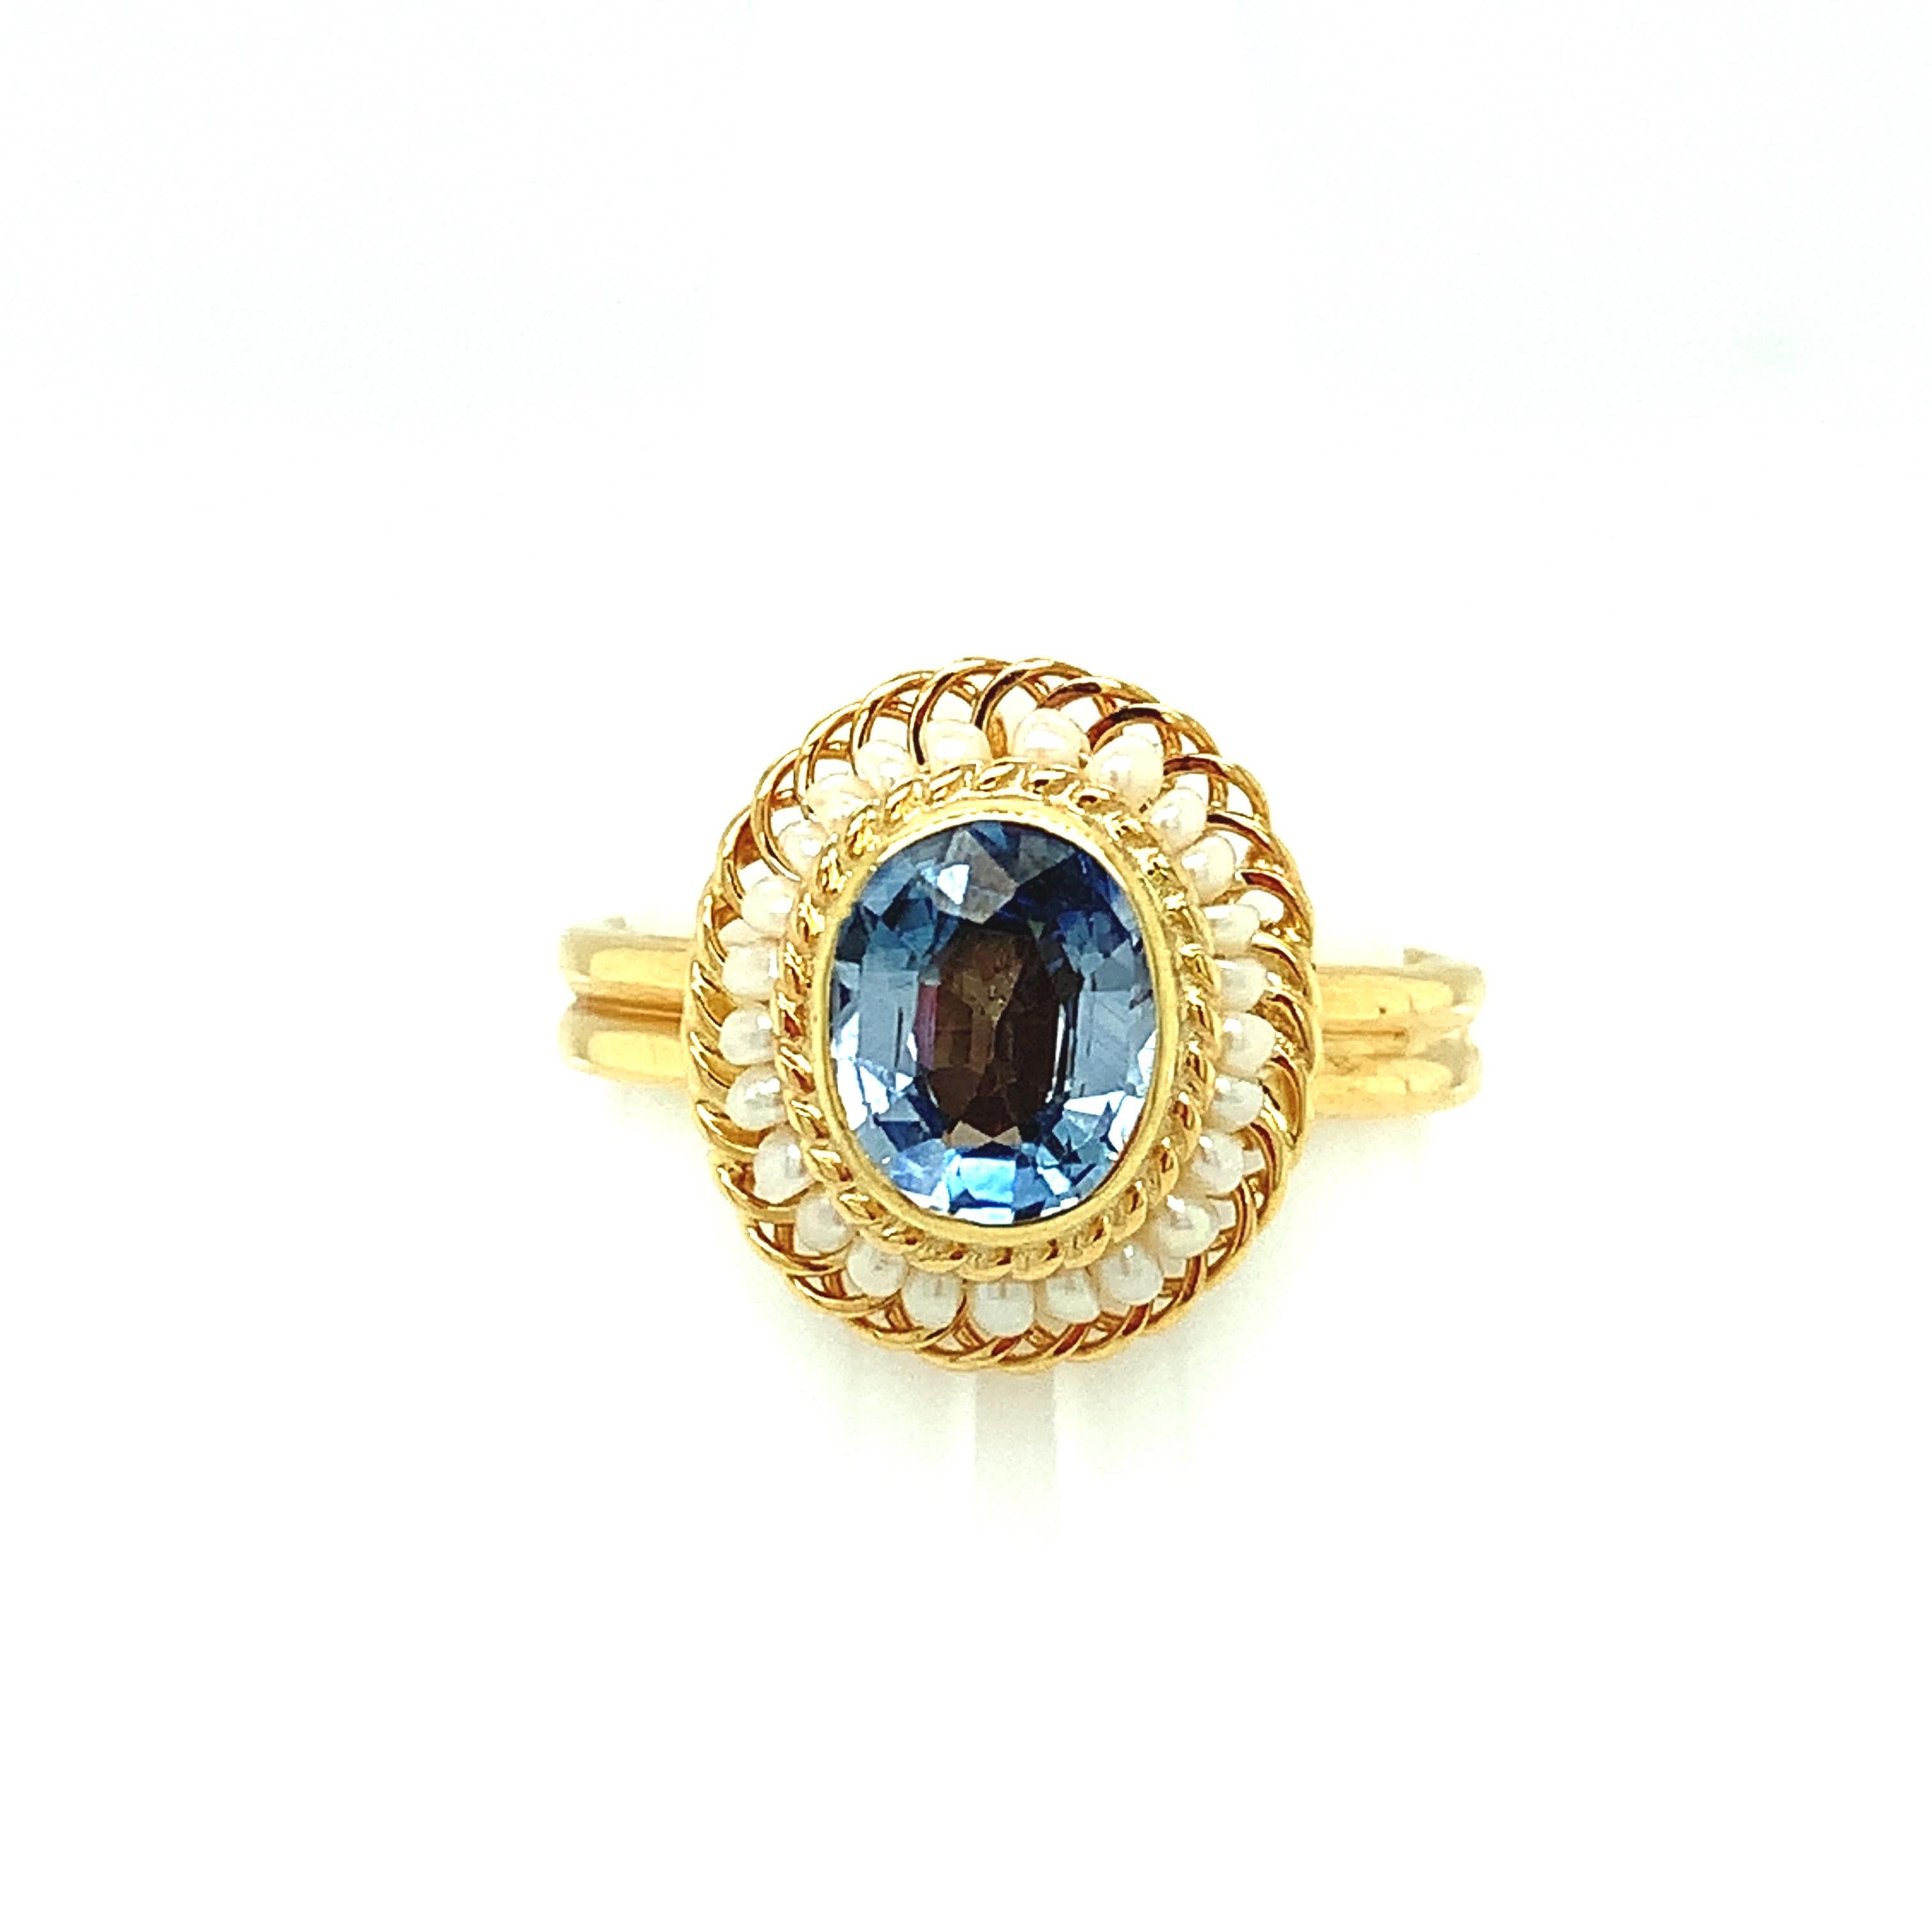 A bright and lively 2.61 carat oval blue sapphire is featured in this beautiful 18k yellow gold cocktail ring. This lovely ring was made by hand using the intricate art of filigree, using fine 18k yellow gold wire to thread and wrap seed pearls into